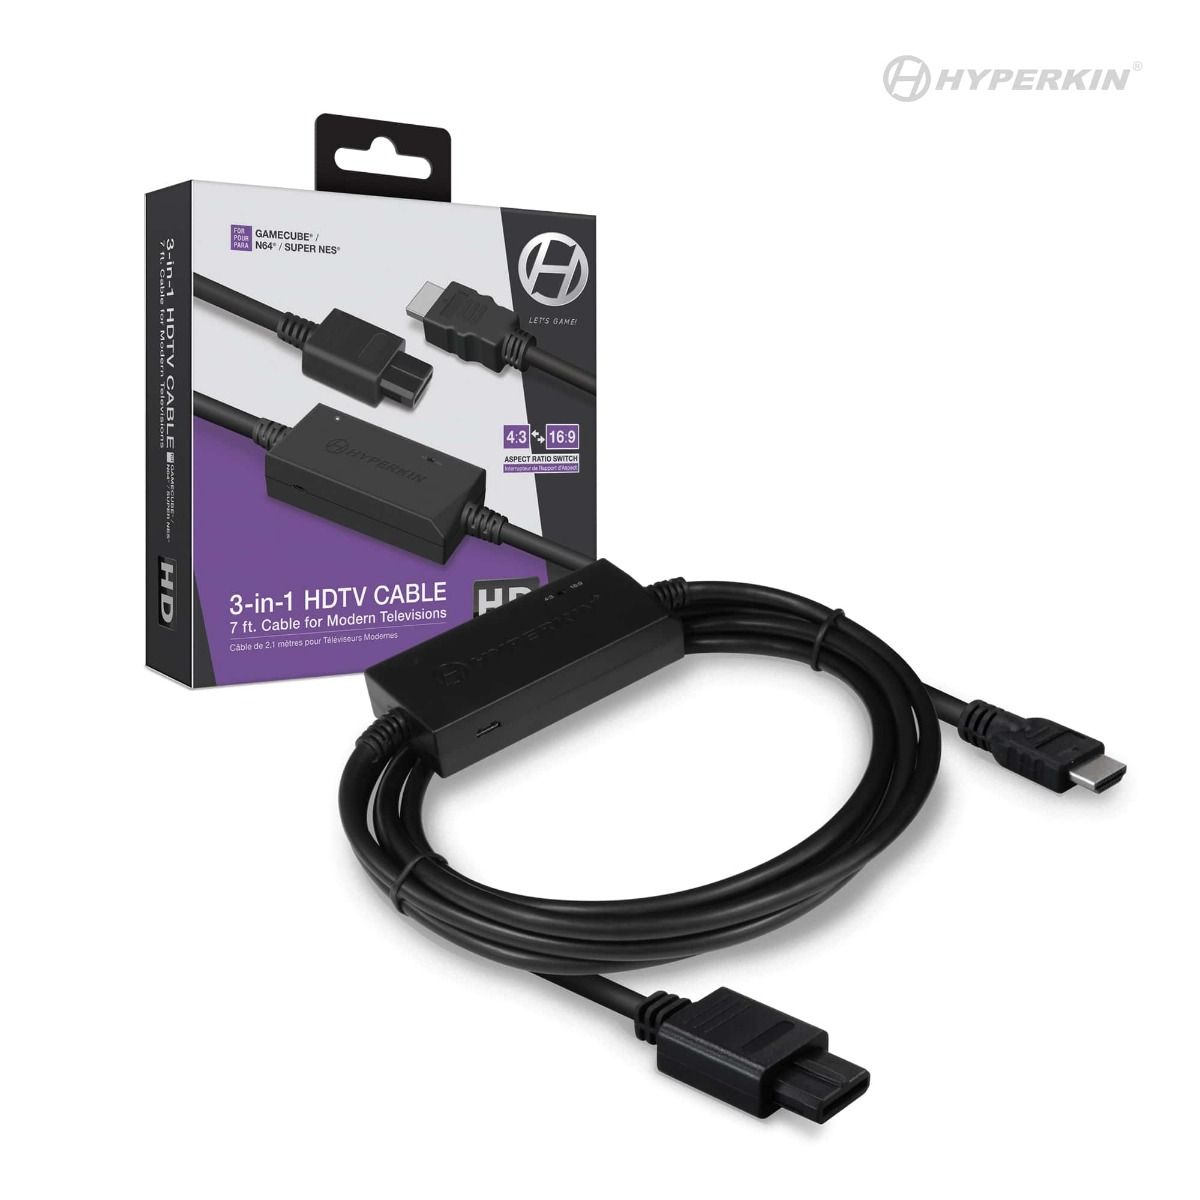 3-in-1 HDTV Cable GameCube/N64/SNES